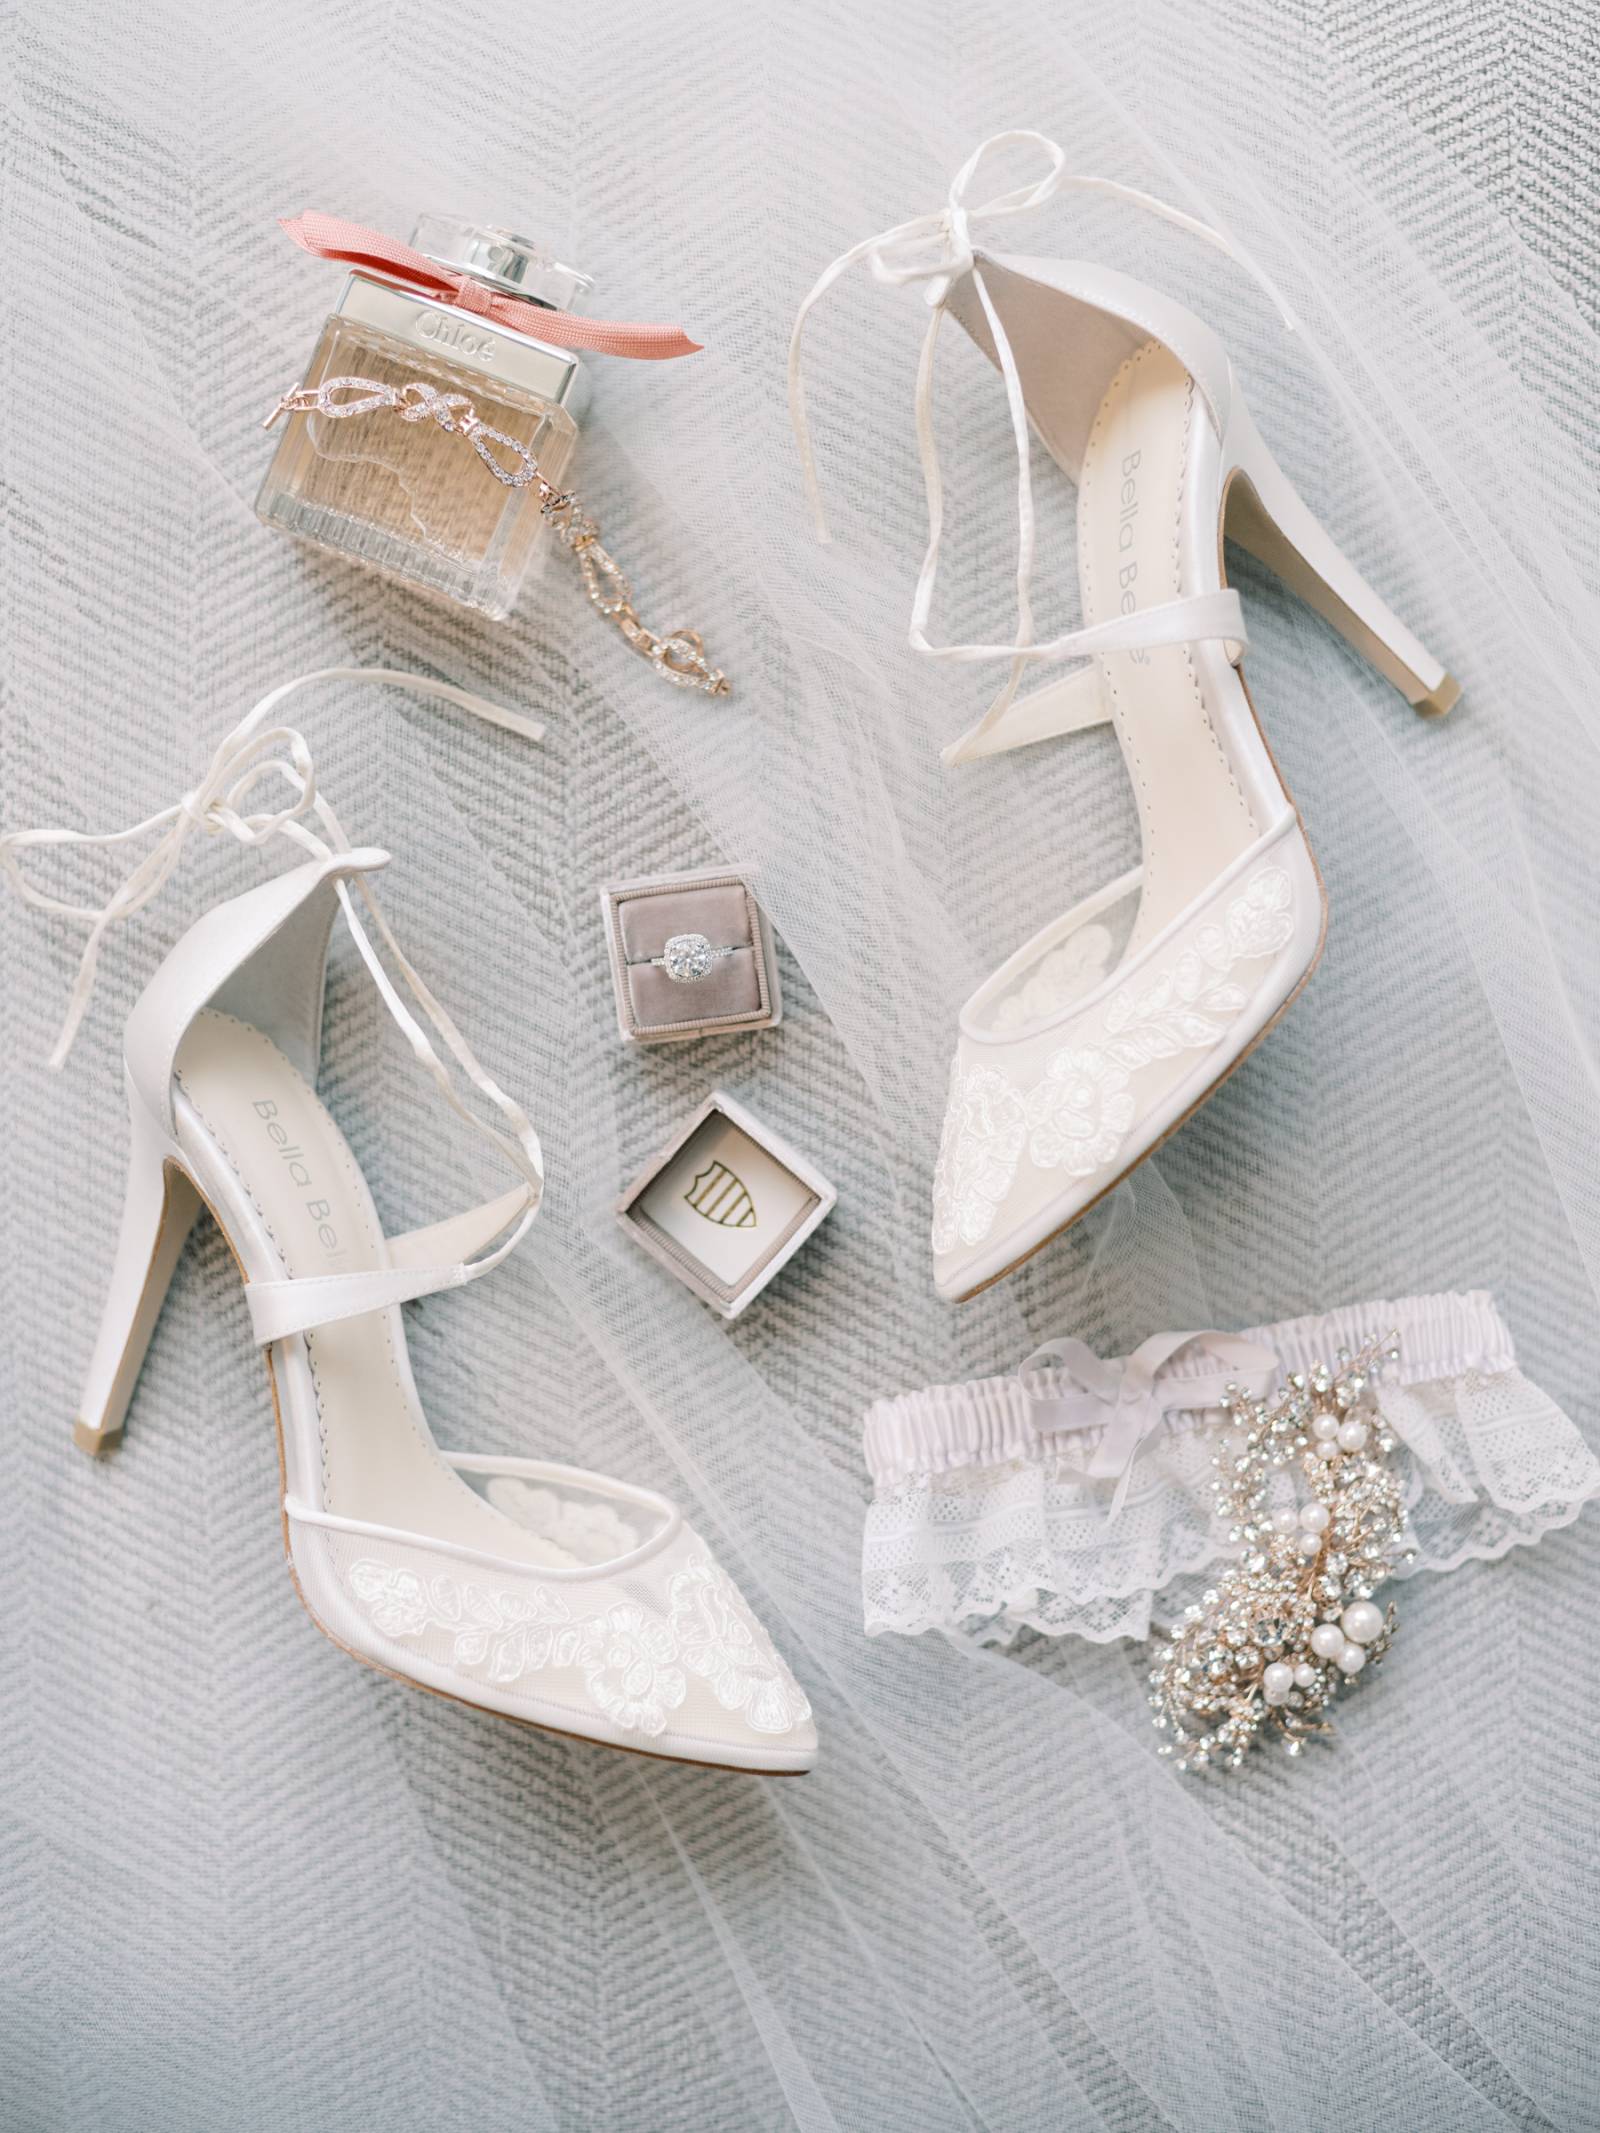 A sweet South Carolina Wedding laden with French details and elegance ...